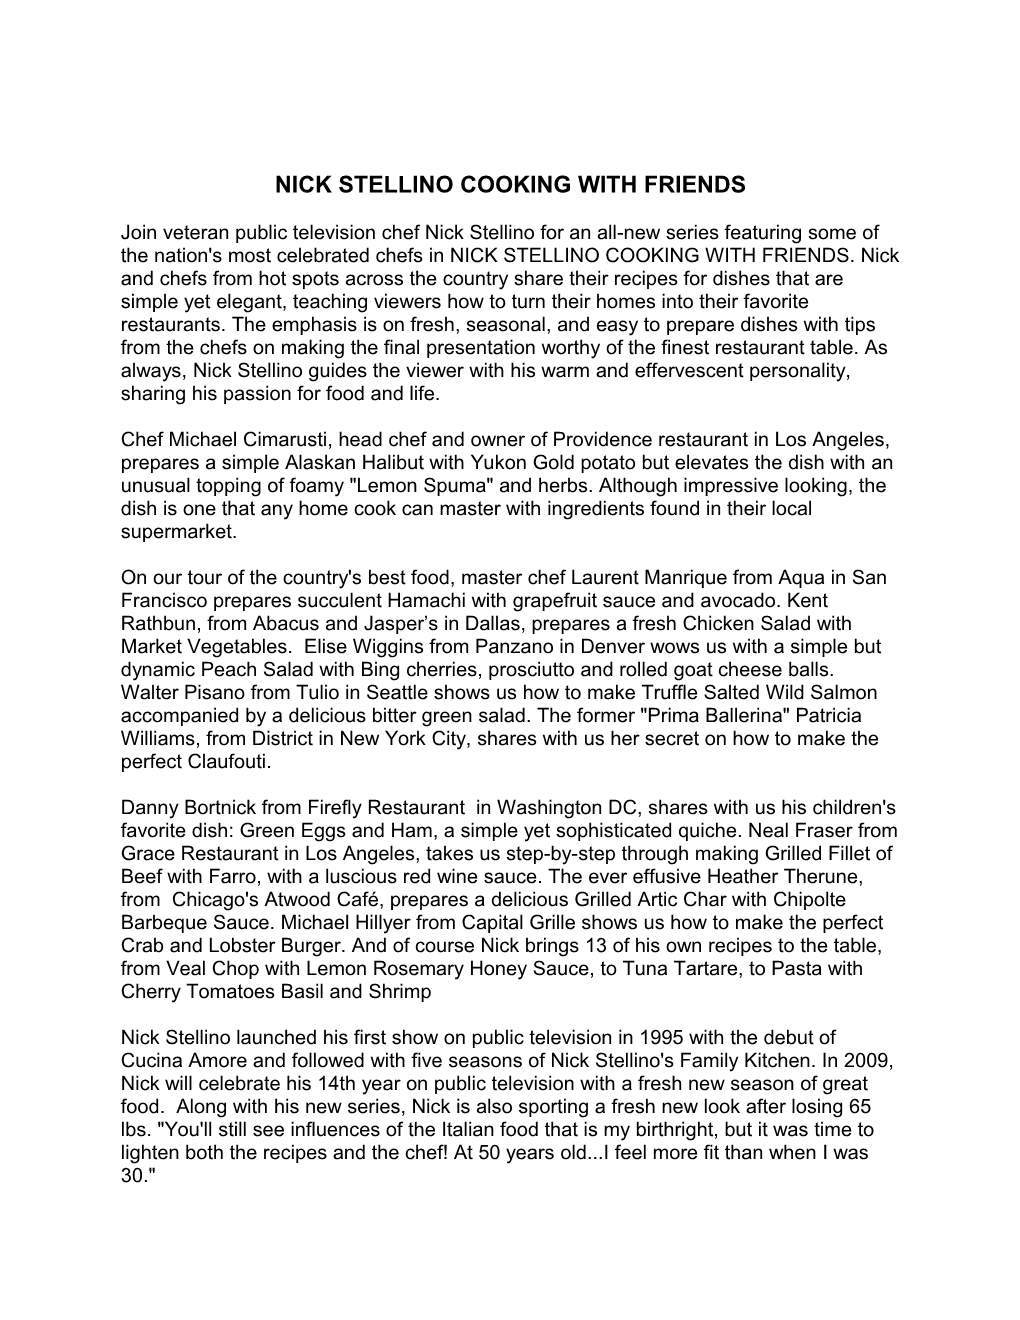 Join Veteran Public Television Chef Nick Stellino for an All-New Series Featuring Some